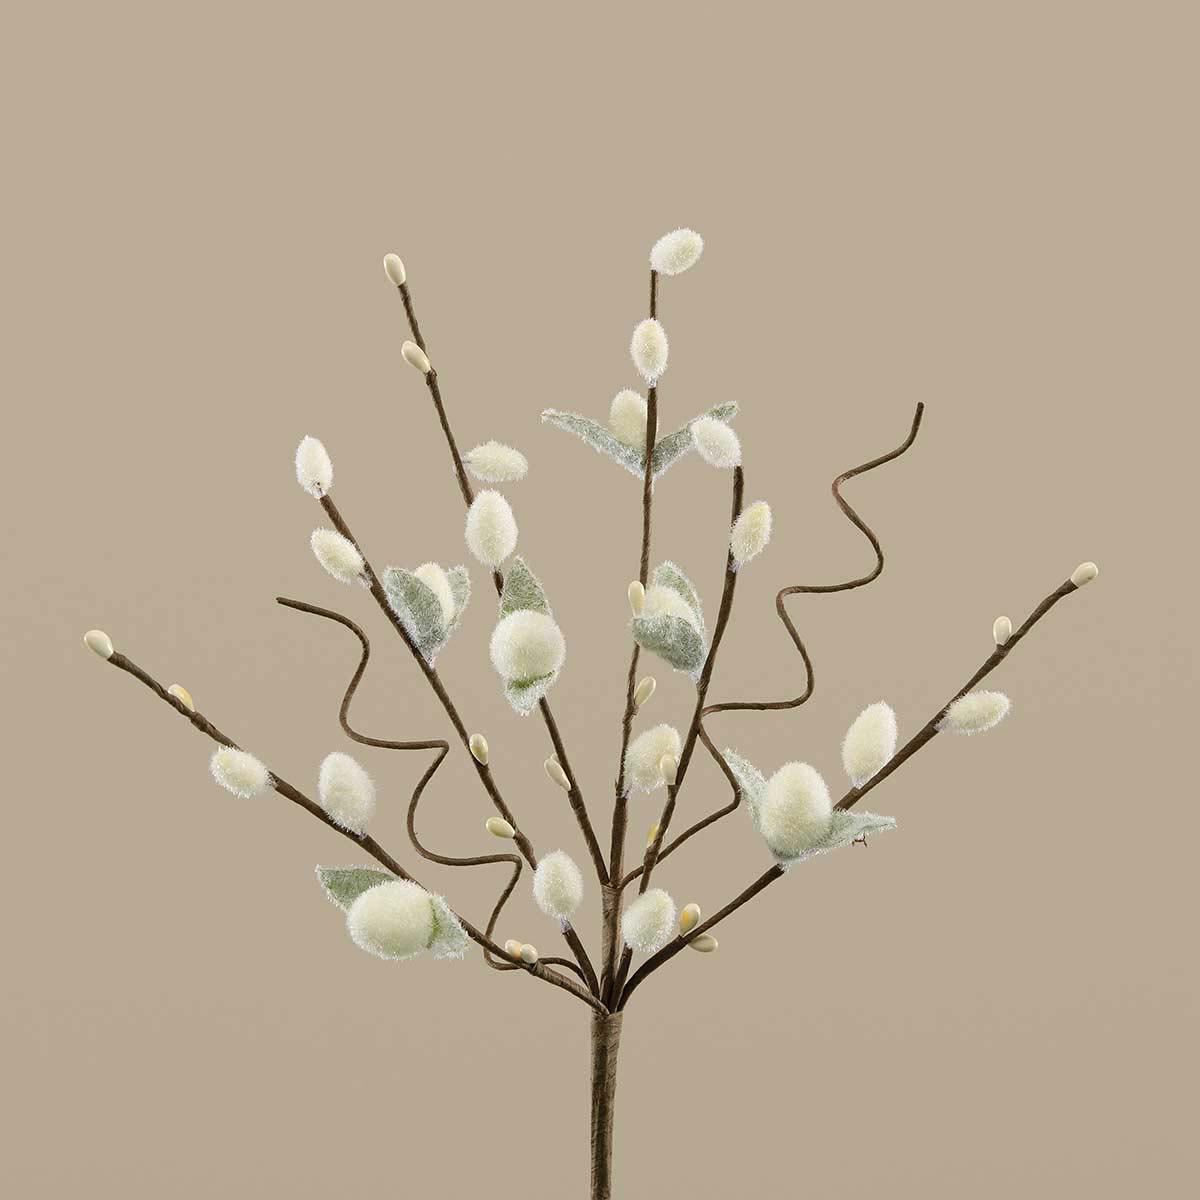 MINI PIK PUSSY WILLOW 6IN X 12IN POLYESTER/FLOCKING/FOAM